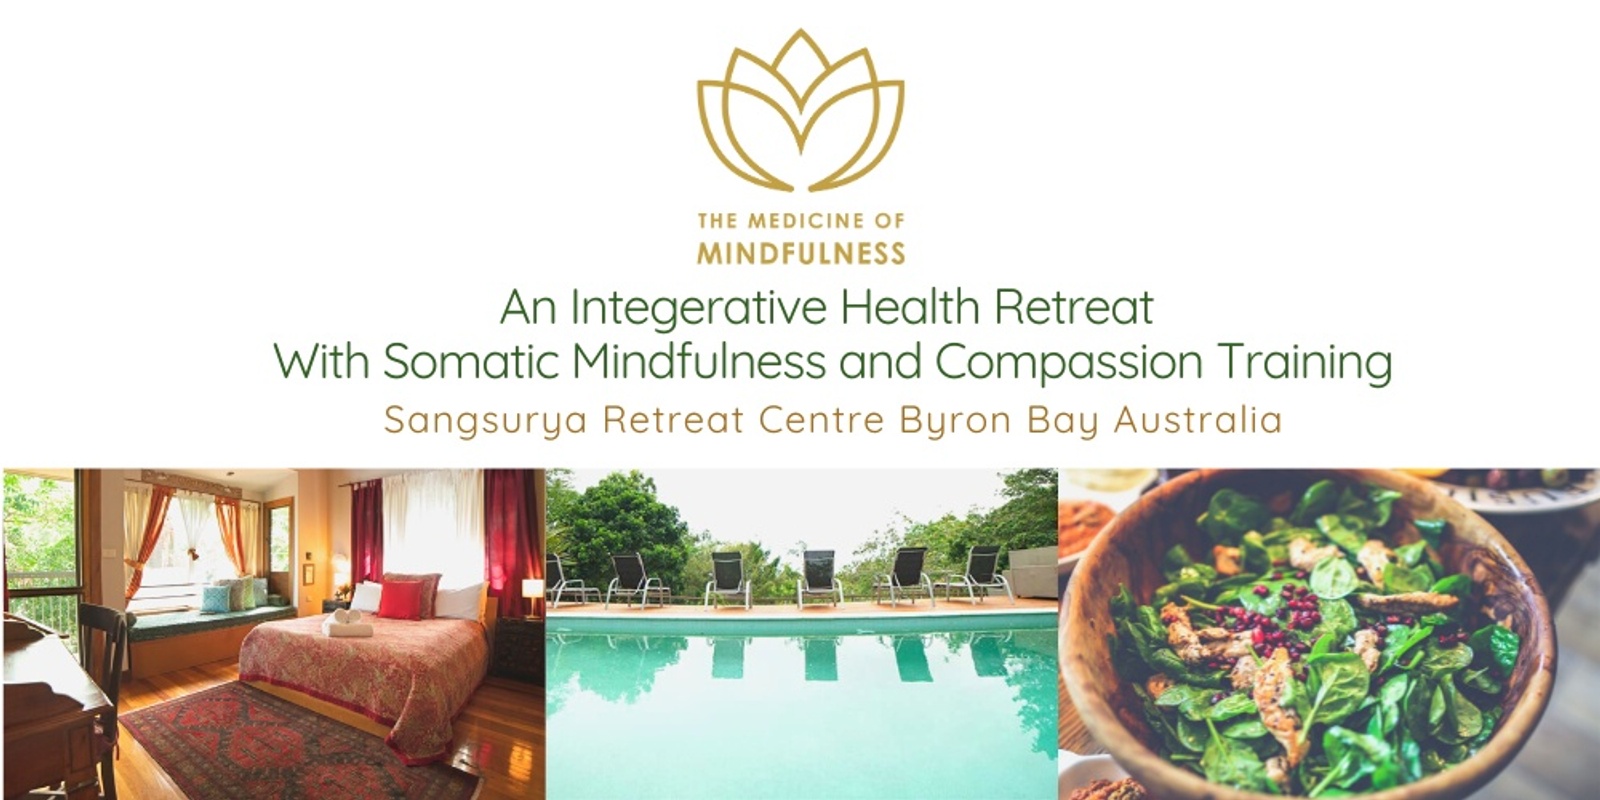 Banner image for The Medicine of Mindfulness - An Integrative Health Retreat